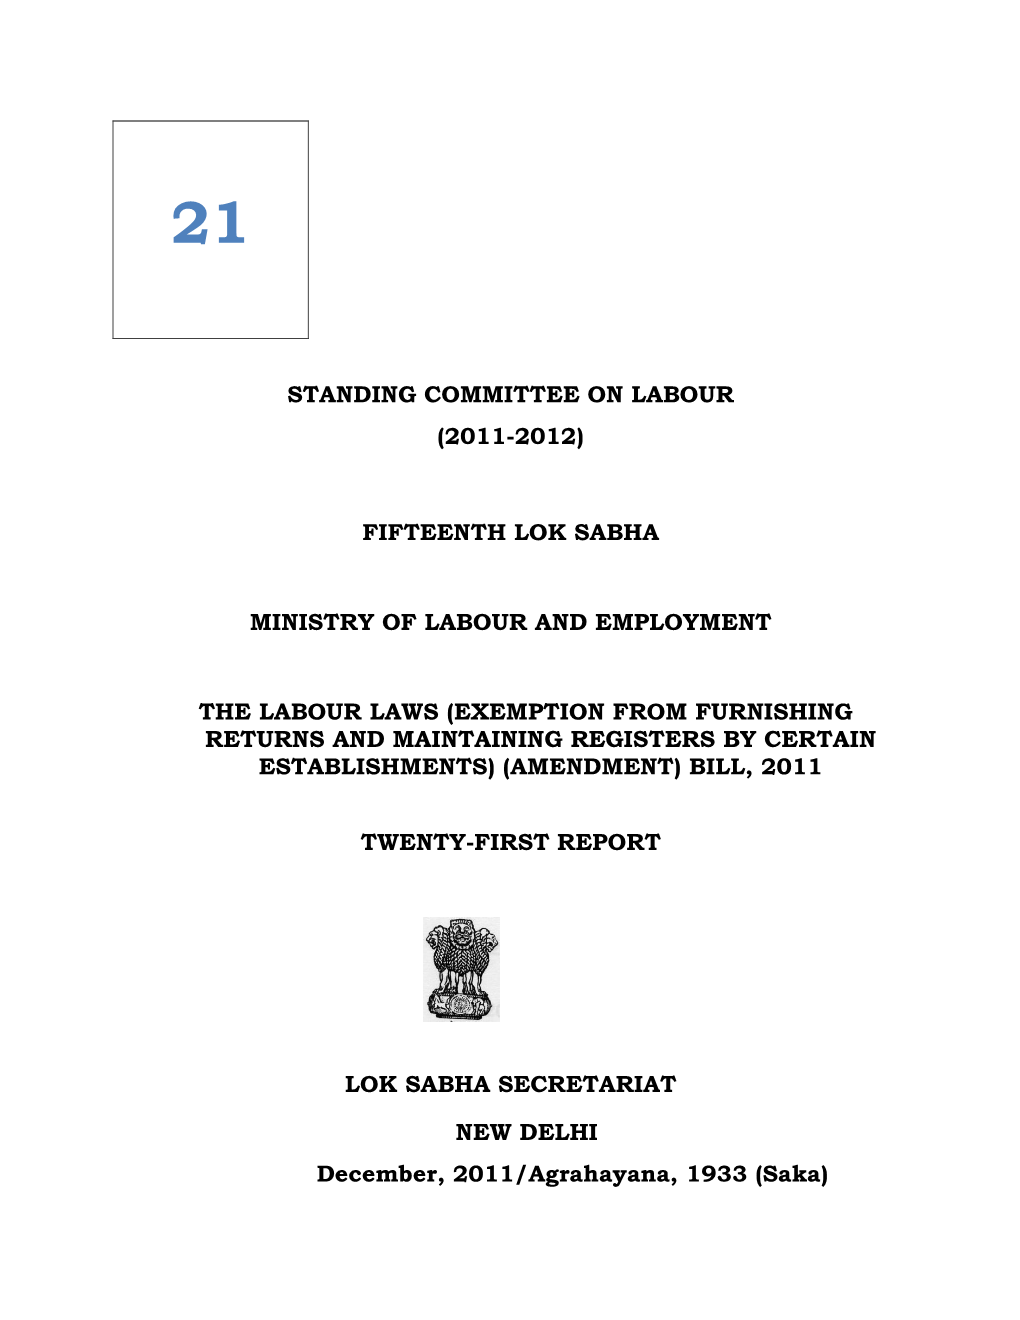 Fifteenth Lok Sabha Ministry of Labour And